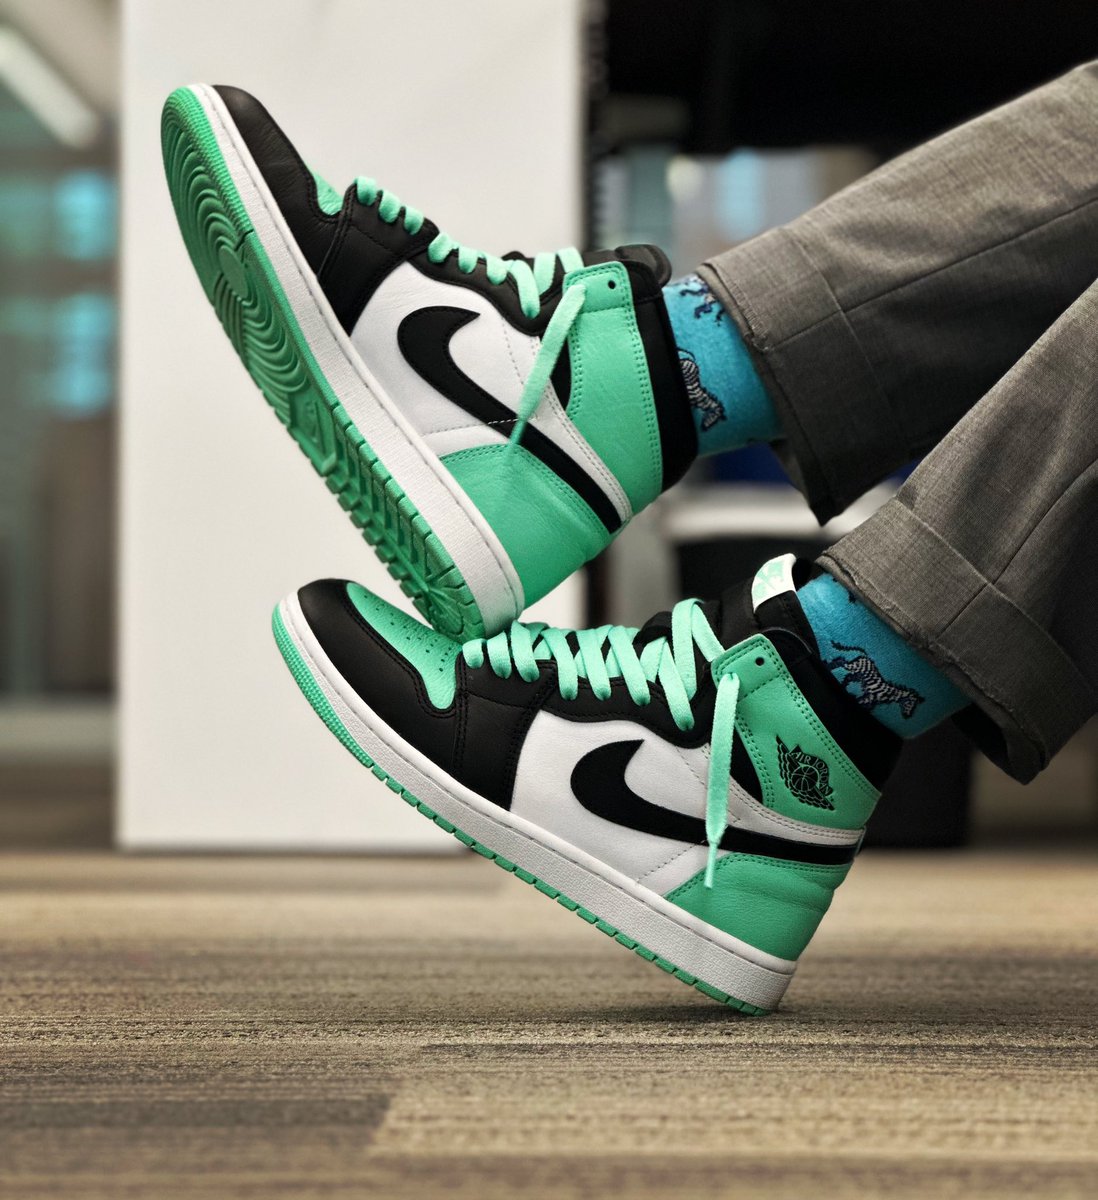 Technically a “Team Early” since I got them on the Shock Drop a while back. Releases Saturday so I’m getting a wear in. Shoes: Air Jordan 1 High “Green Glow” #Sneakers #Kicks #SNKRS #WDYWT #WOMFT  #KOTD #WearYourKicks #SNKRSLiveHeatingUp #Sneakerhead #YourSneakersAreDope #Nike